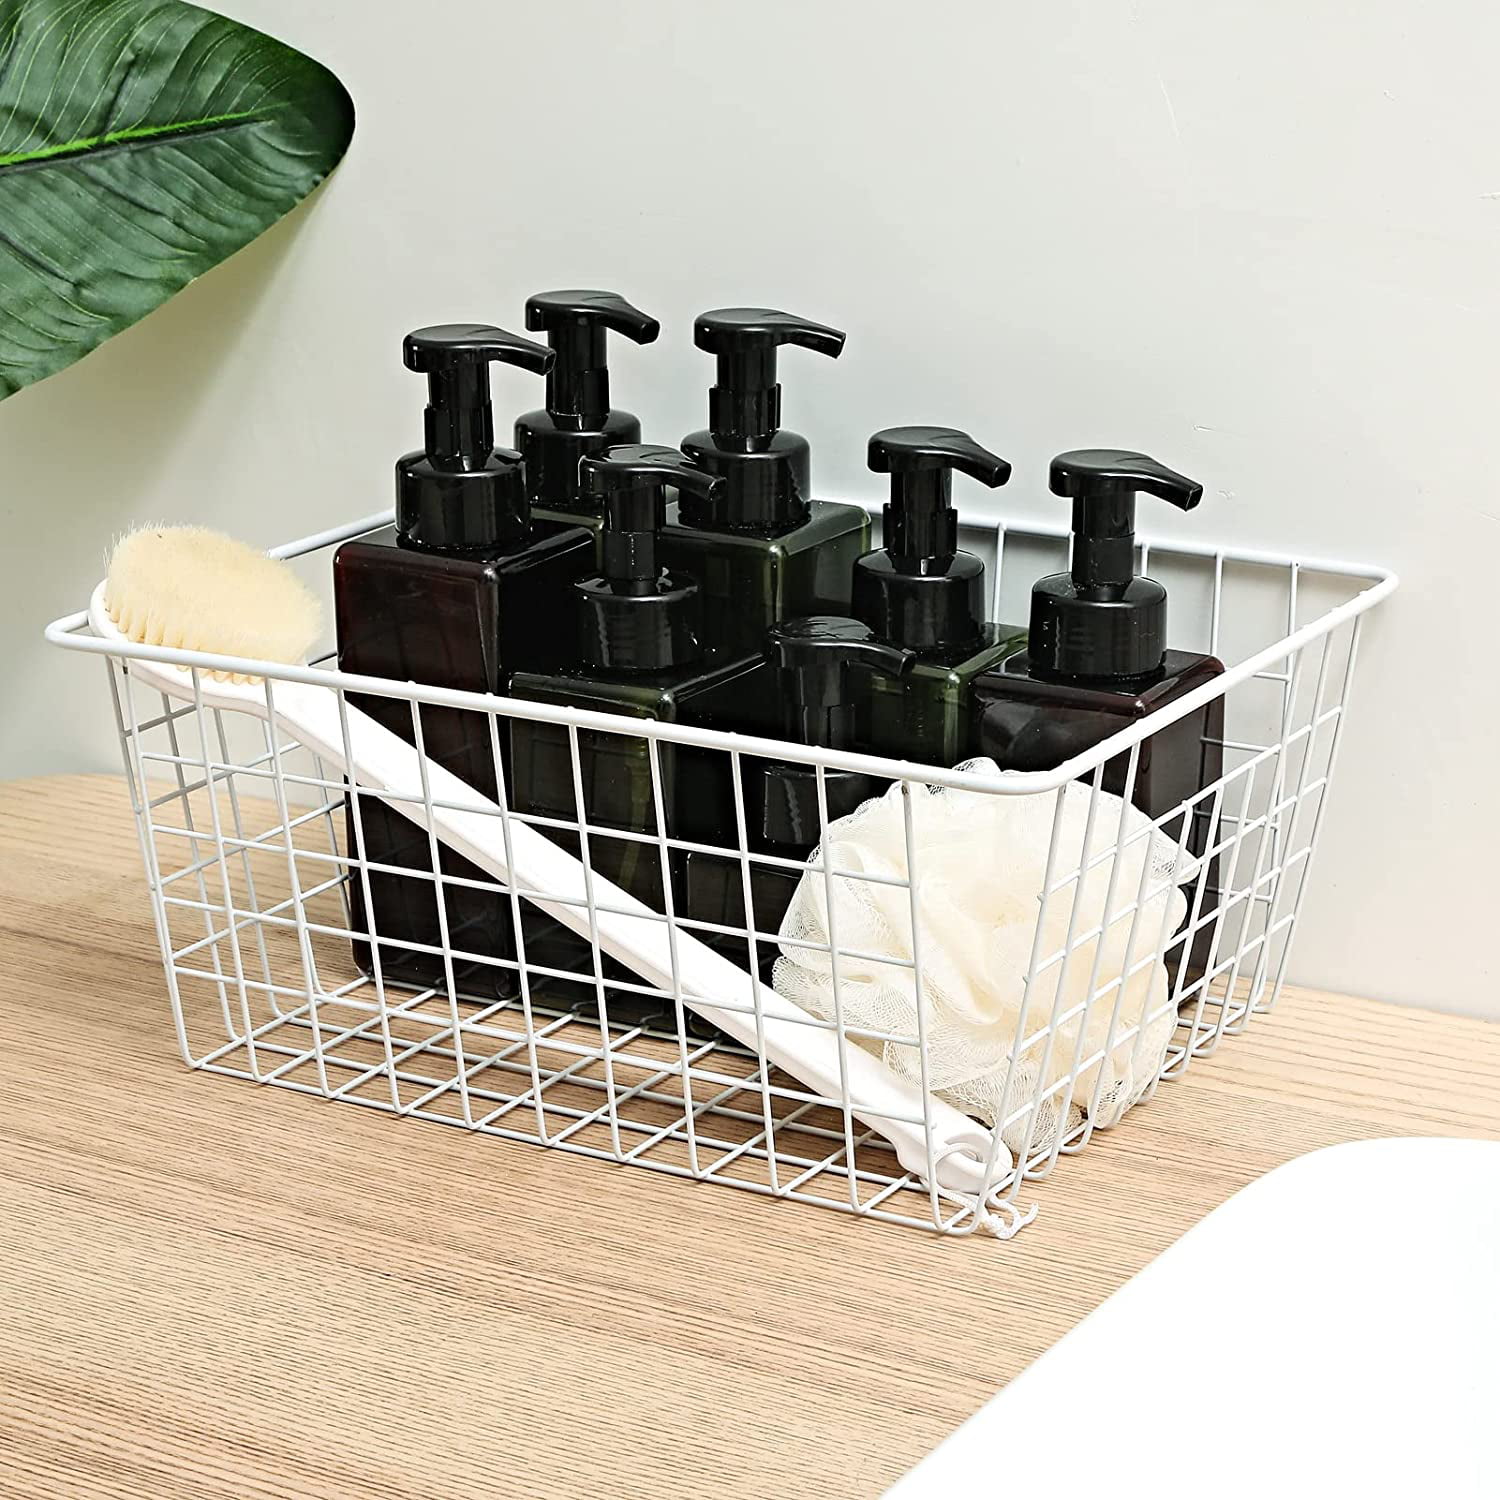 How to Turn Wire Baskets into Bathroom Storage Shelves — Simply